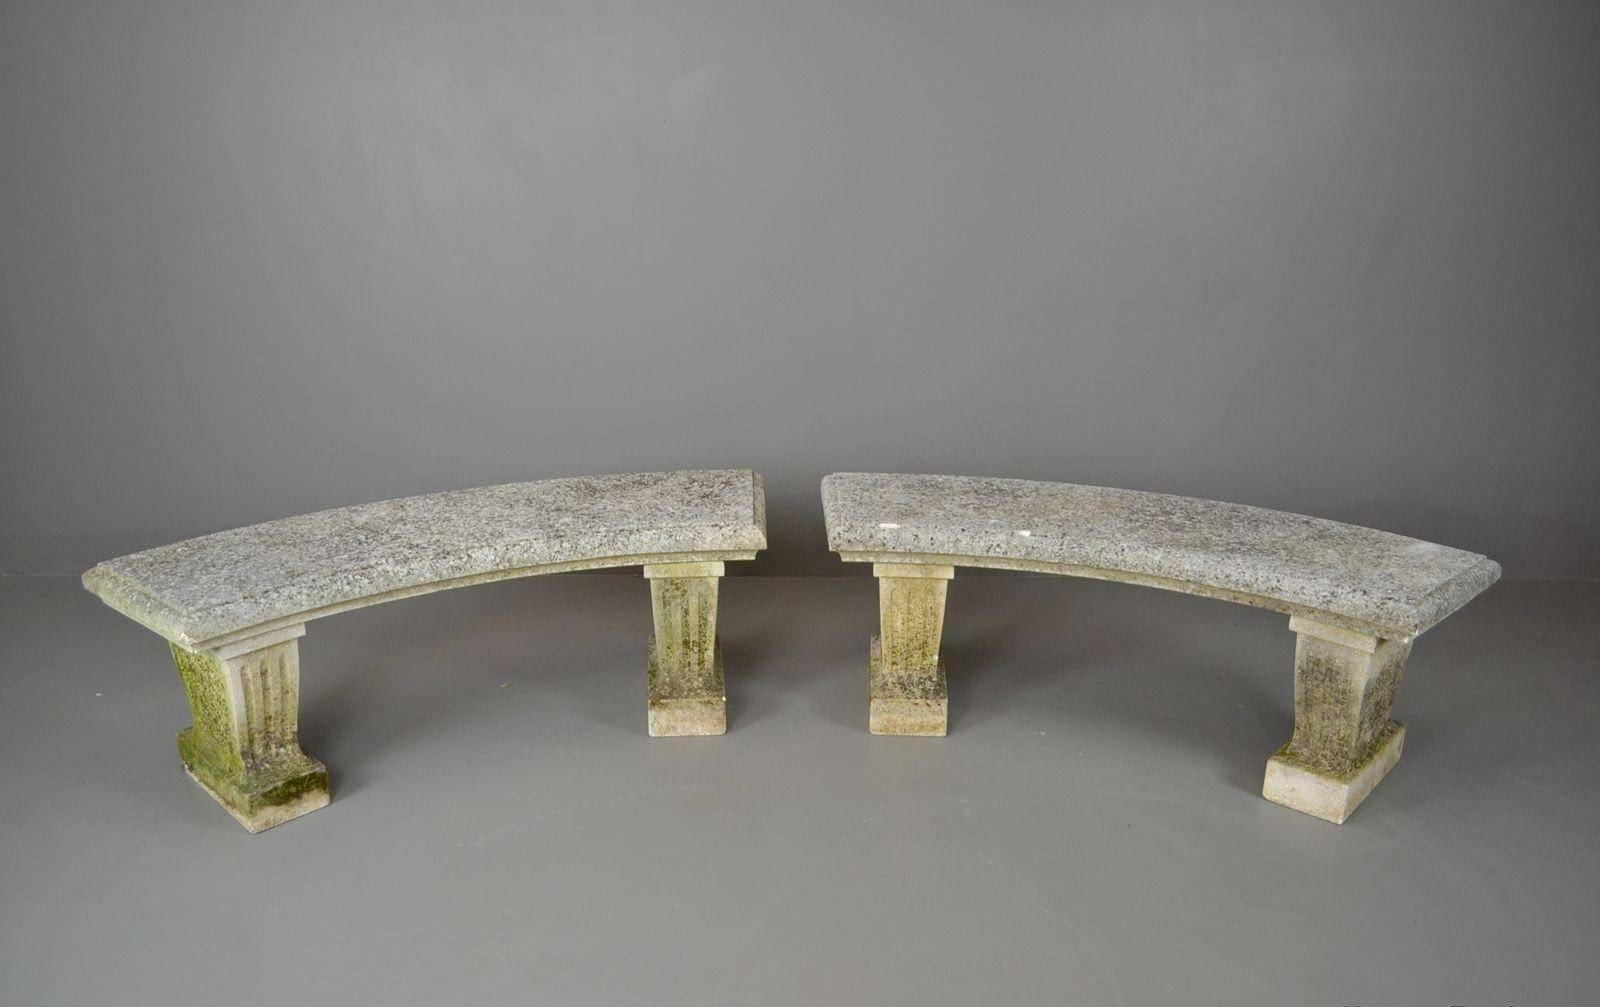 Pair of 20th century cast stone garden benches. Fluted supports with a gently curved top with moulded edge. Beautiful pieces to complement any garden.

Please click our logo for more items, and to see our full inventory.